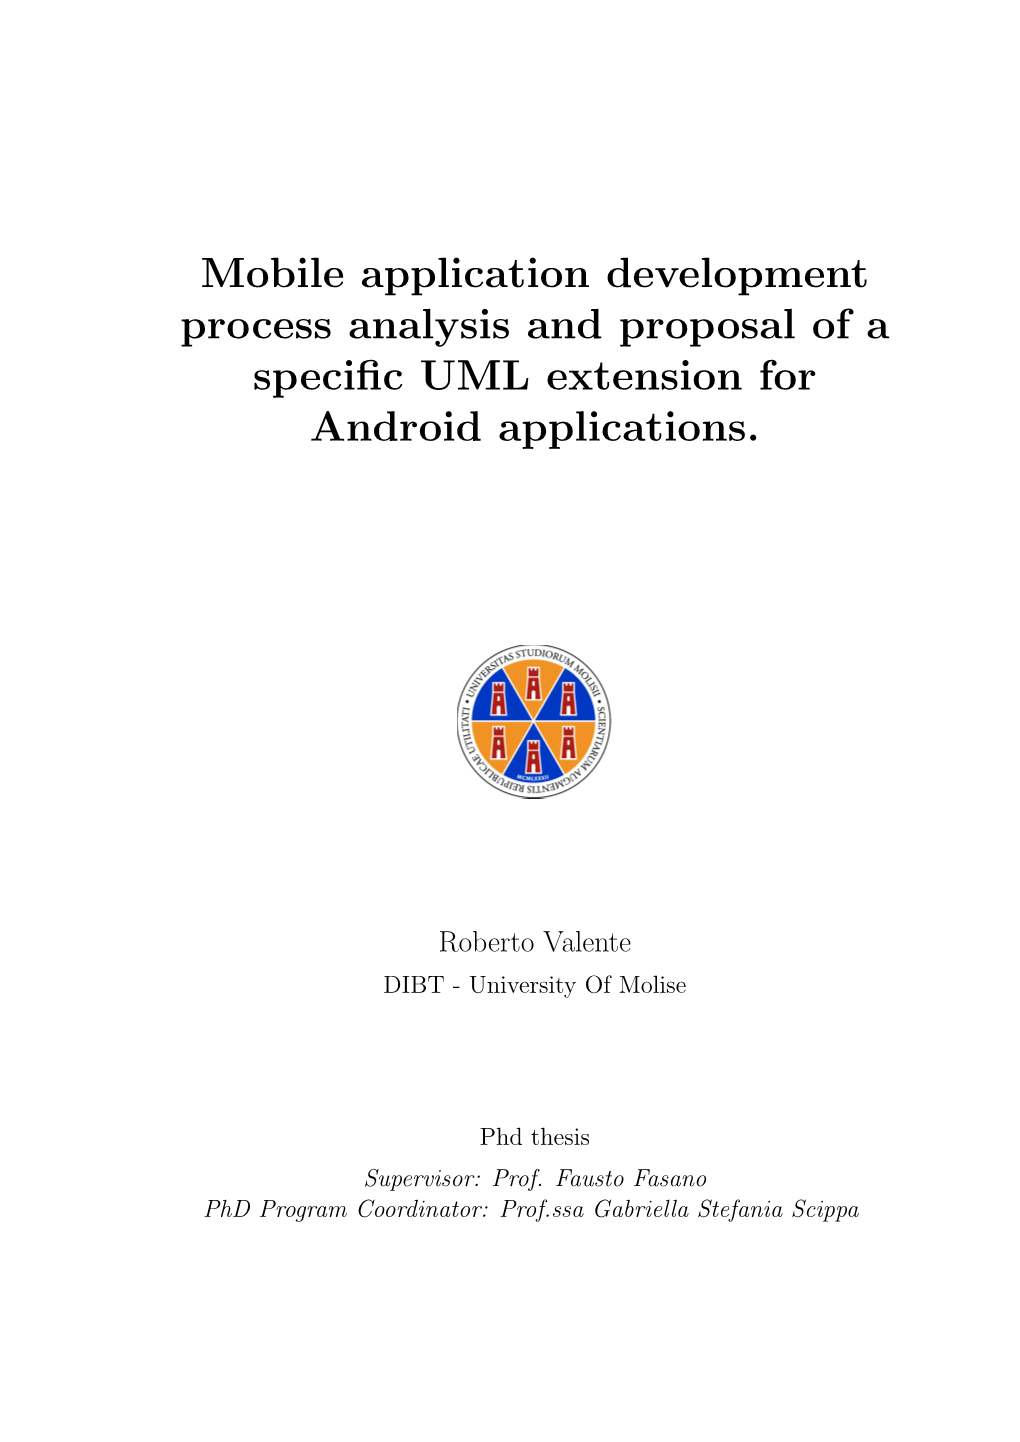 Mobile Application Development Process Analysis and Proposal of a Specific UML Extension for Android Applications